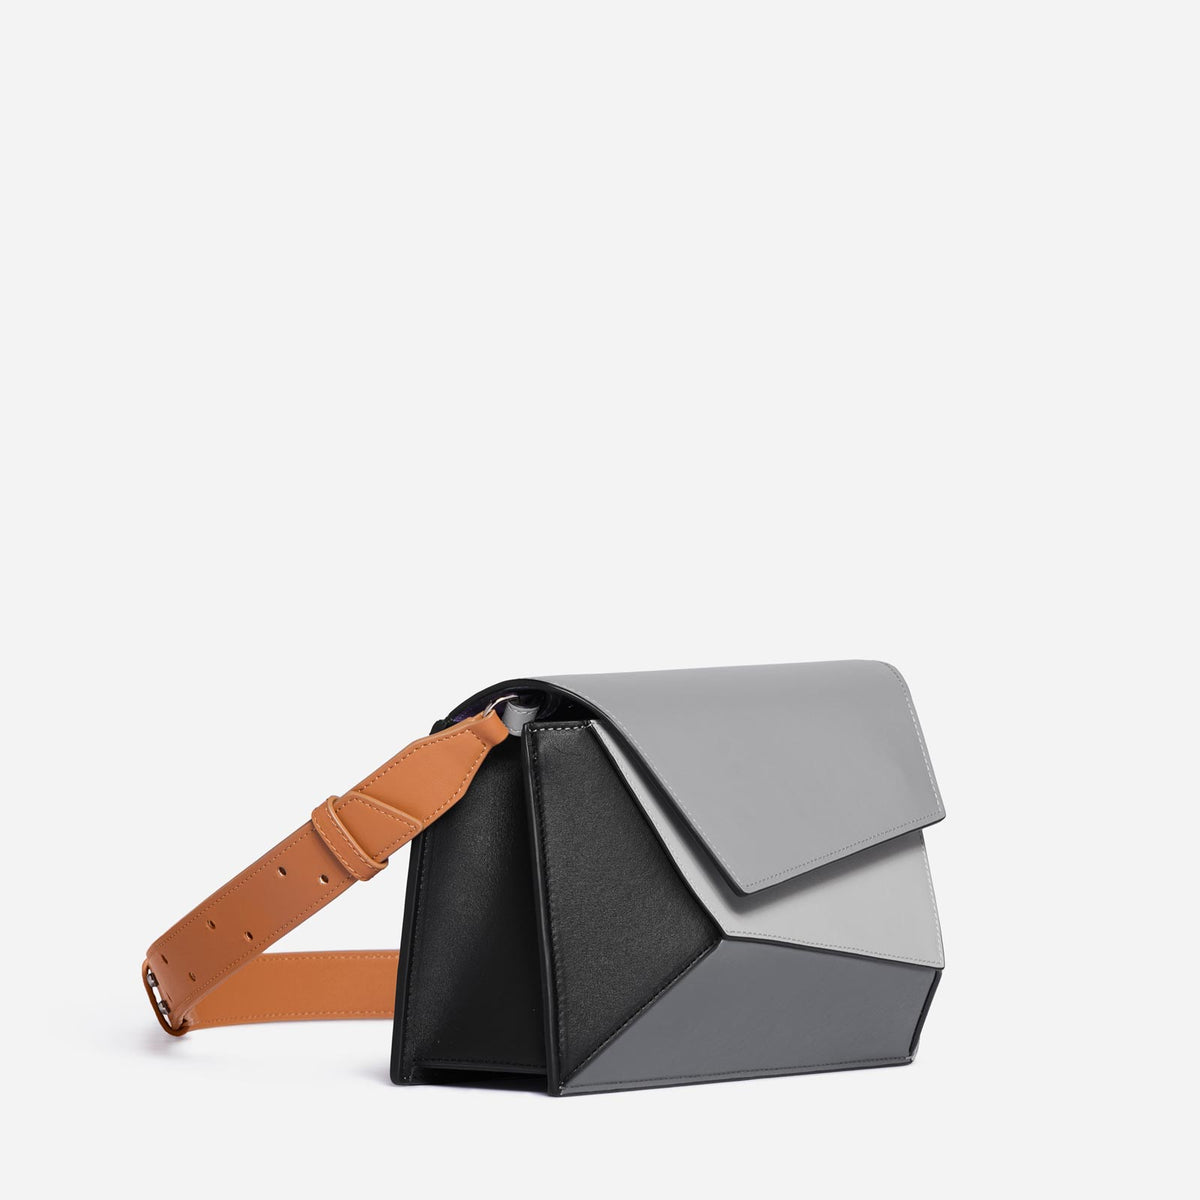 Polygon-shaped duffle bag in black leather